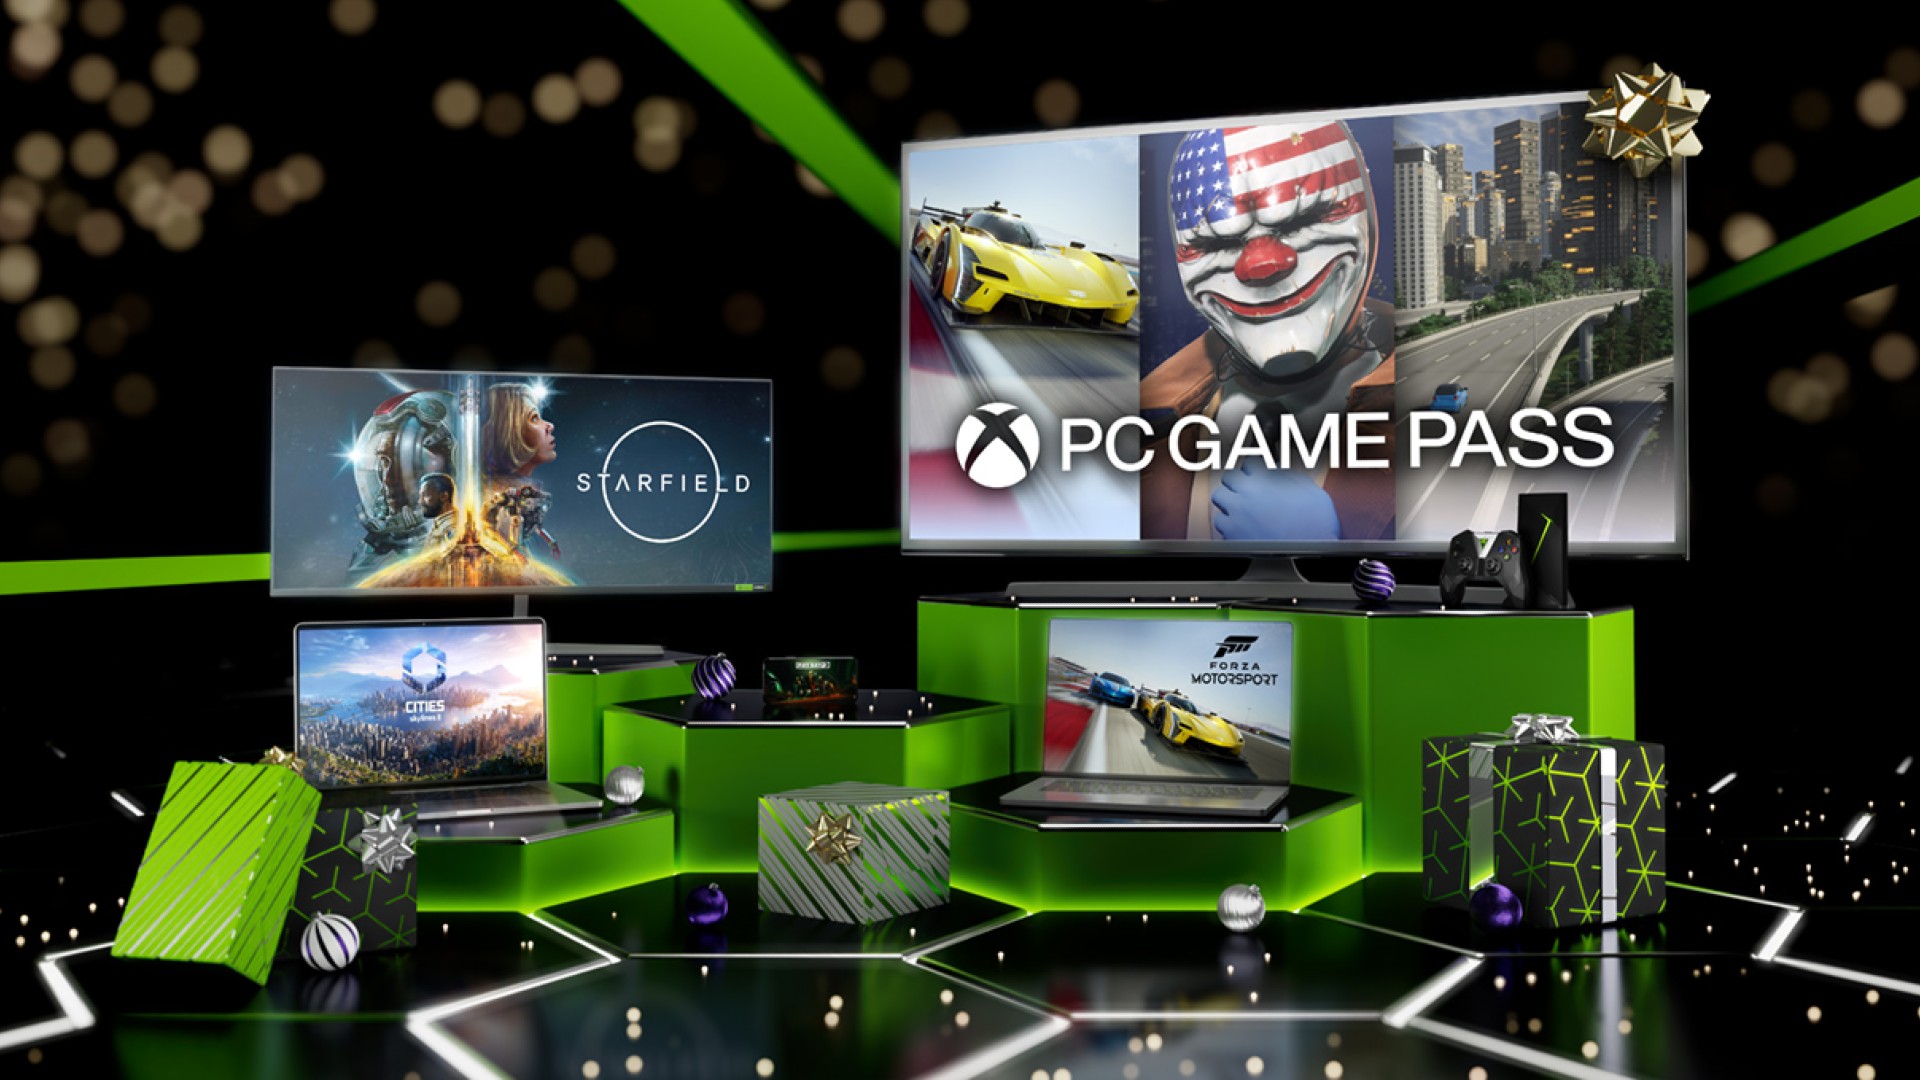 Grab three free months of PC Game Pass with GeForce Now